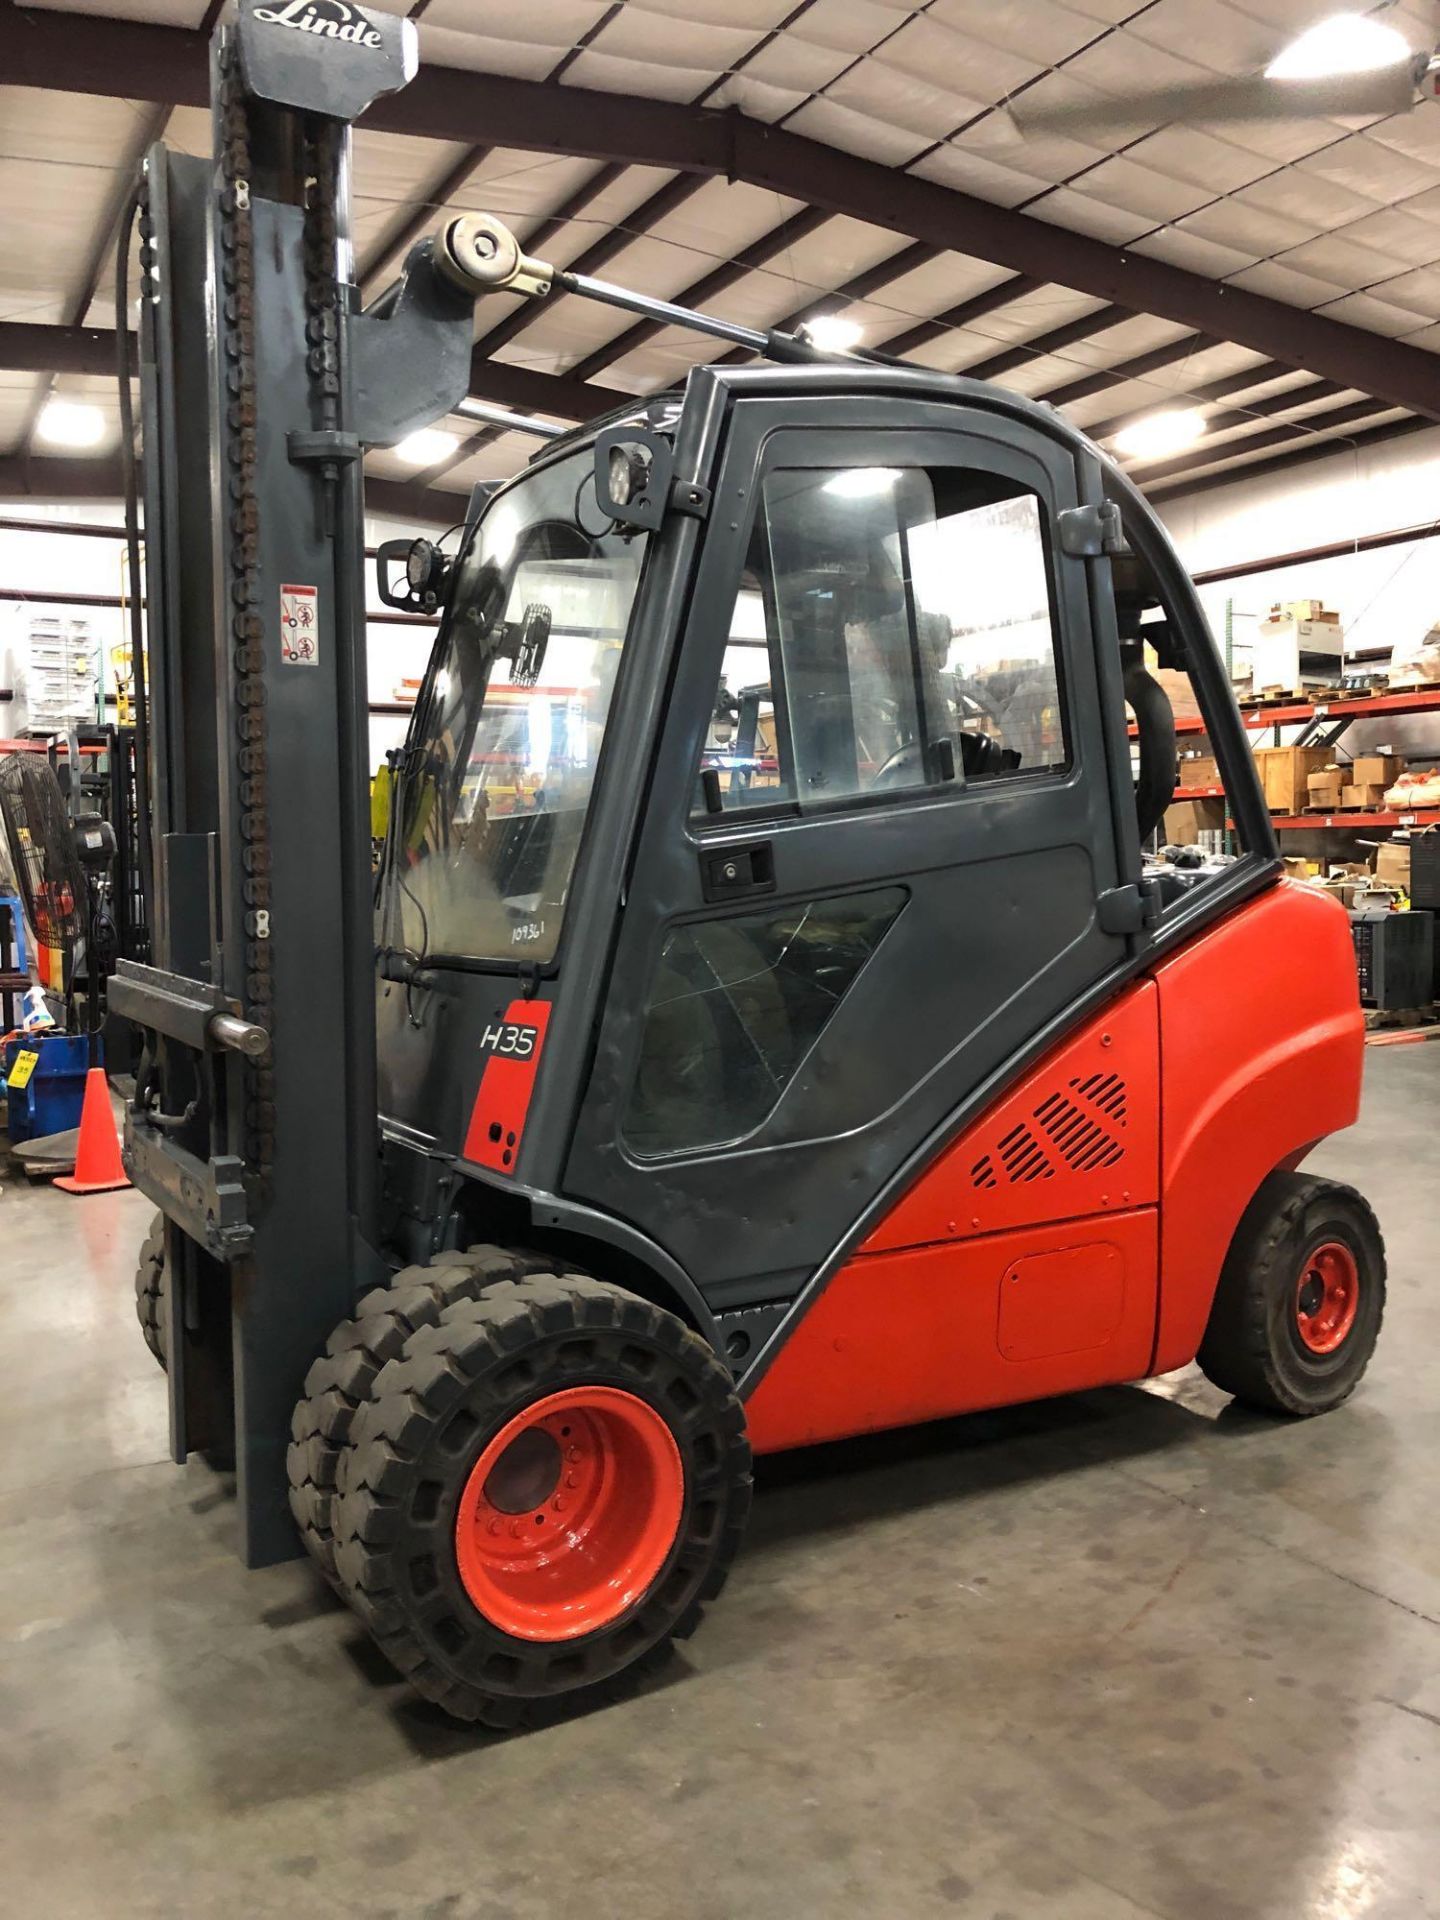 2013 LINDE H35 DIESEL ENCLOSED/CLIMATE CONTROLLED CAB FORKLIFT, APPROX. 7,500 LB LIFT CAPACITY, DUAL - Image 4 of 8